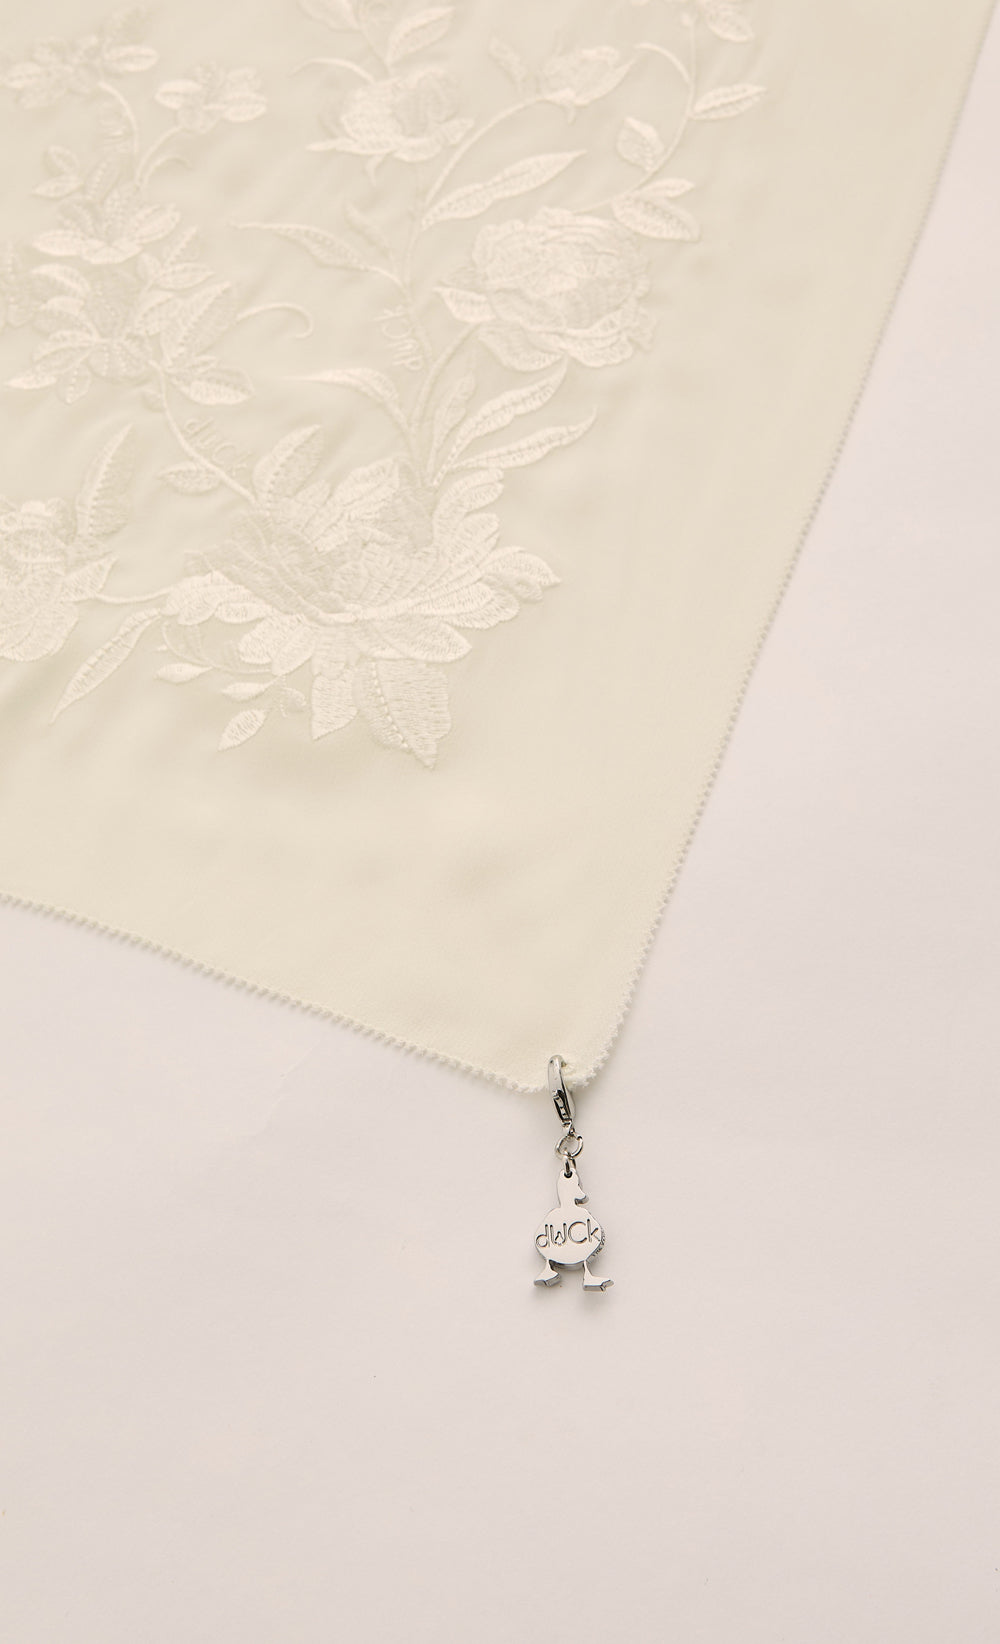 The Peonies Embroidery dUCk Square Scarf in White